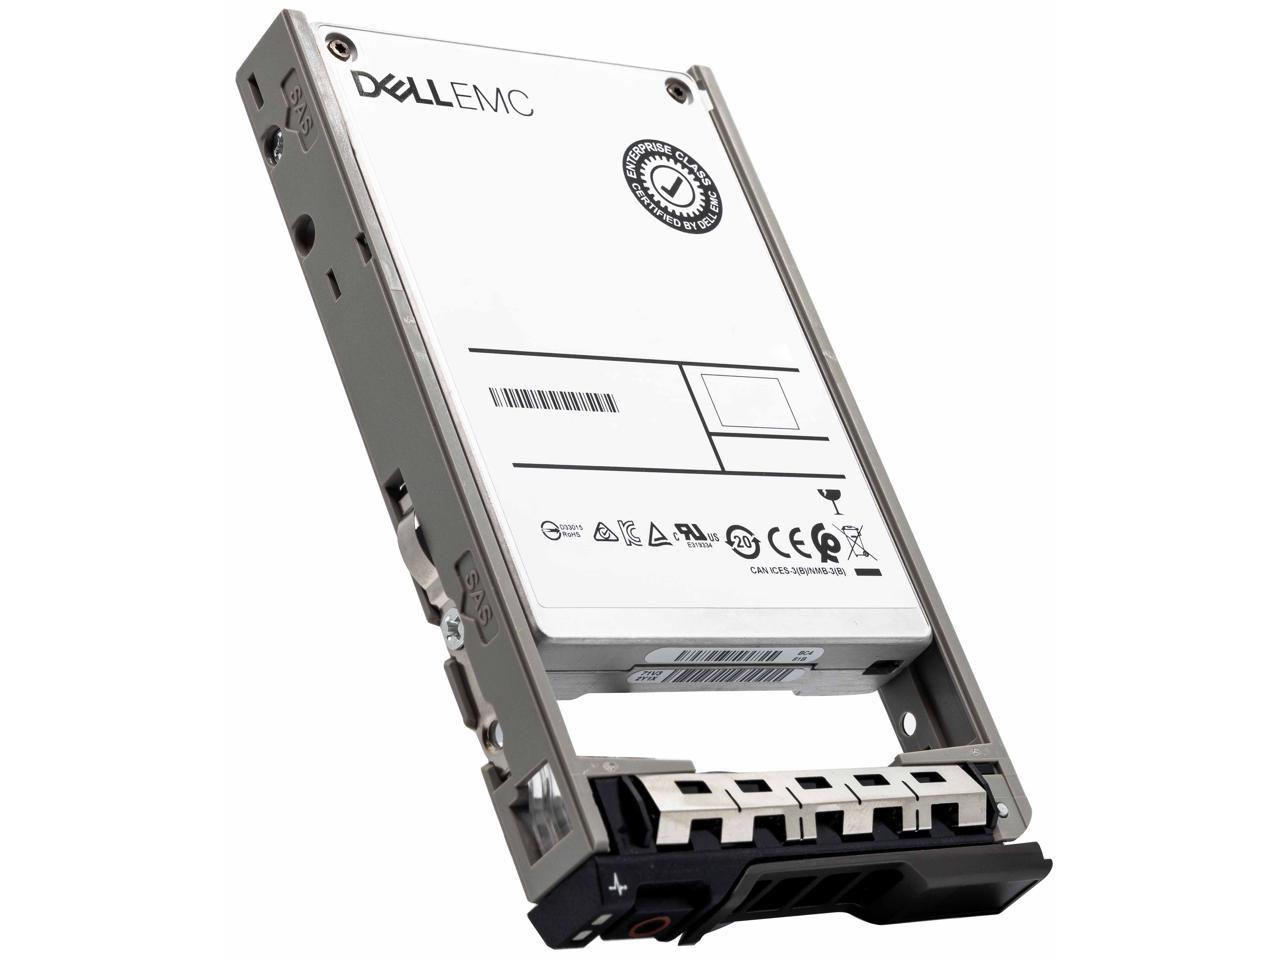 Dell G13 0CW988 800GB SAS 12Gb/s 2.5" Solid State Drive